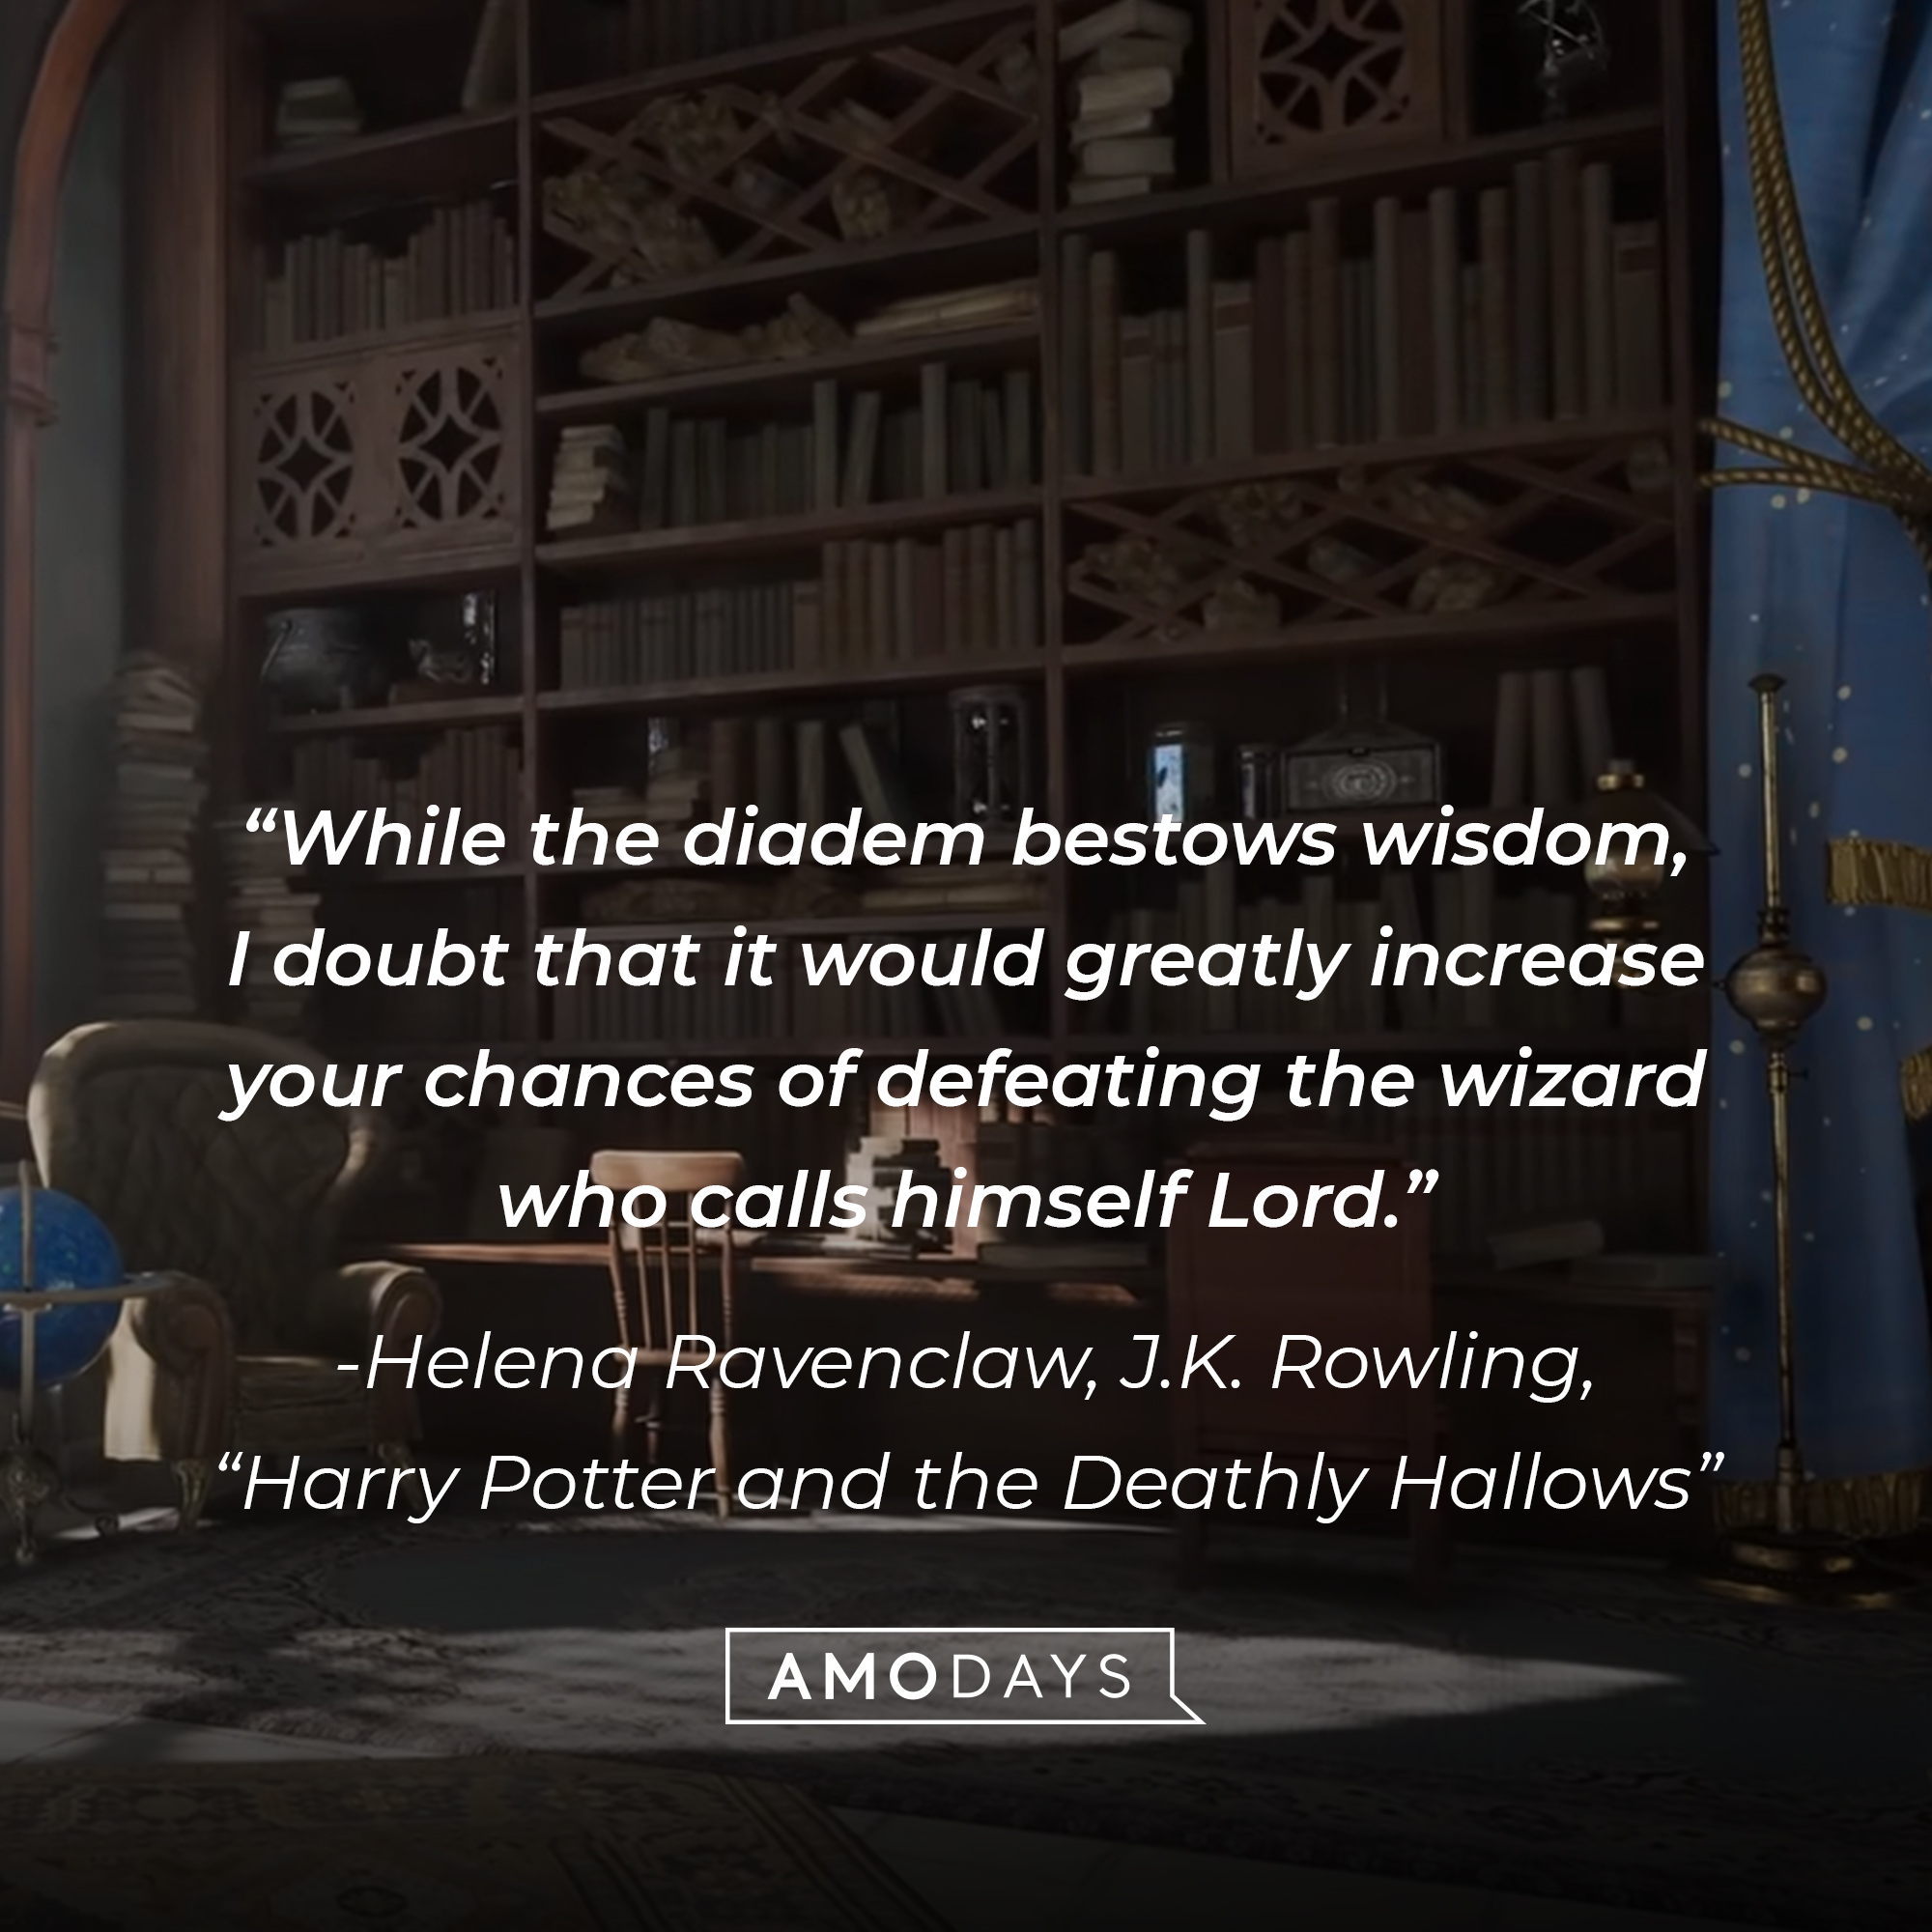 Helena Ravenclaw’s quote from J.K. Rowling’s “Harry Potter and the Deathly Hallows”:  "While the diadem bestows wisdom, I doubt that it would greatly increase your chances of defeating the wizard who calls himself Lord."